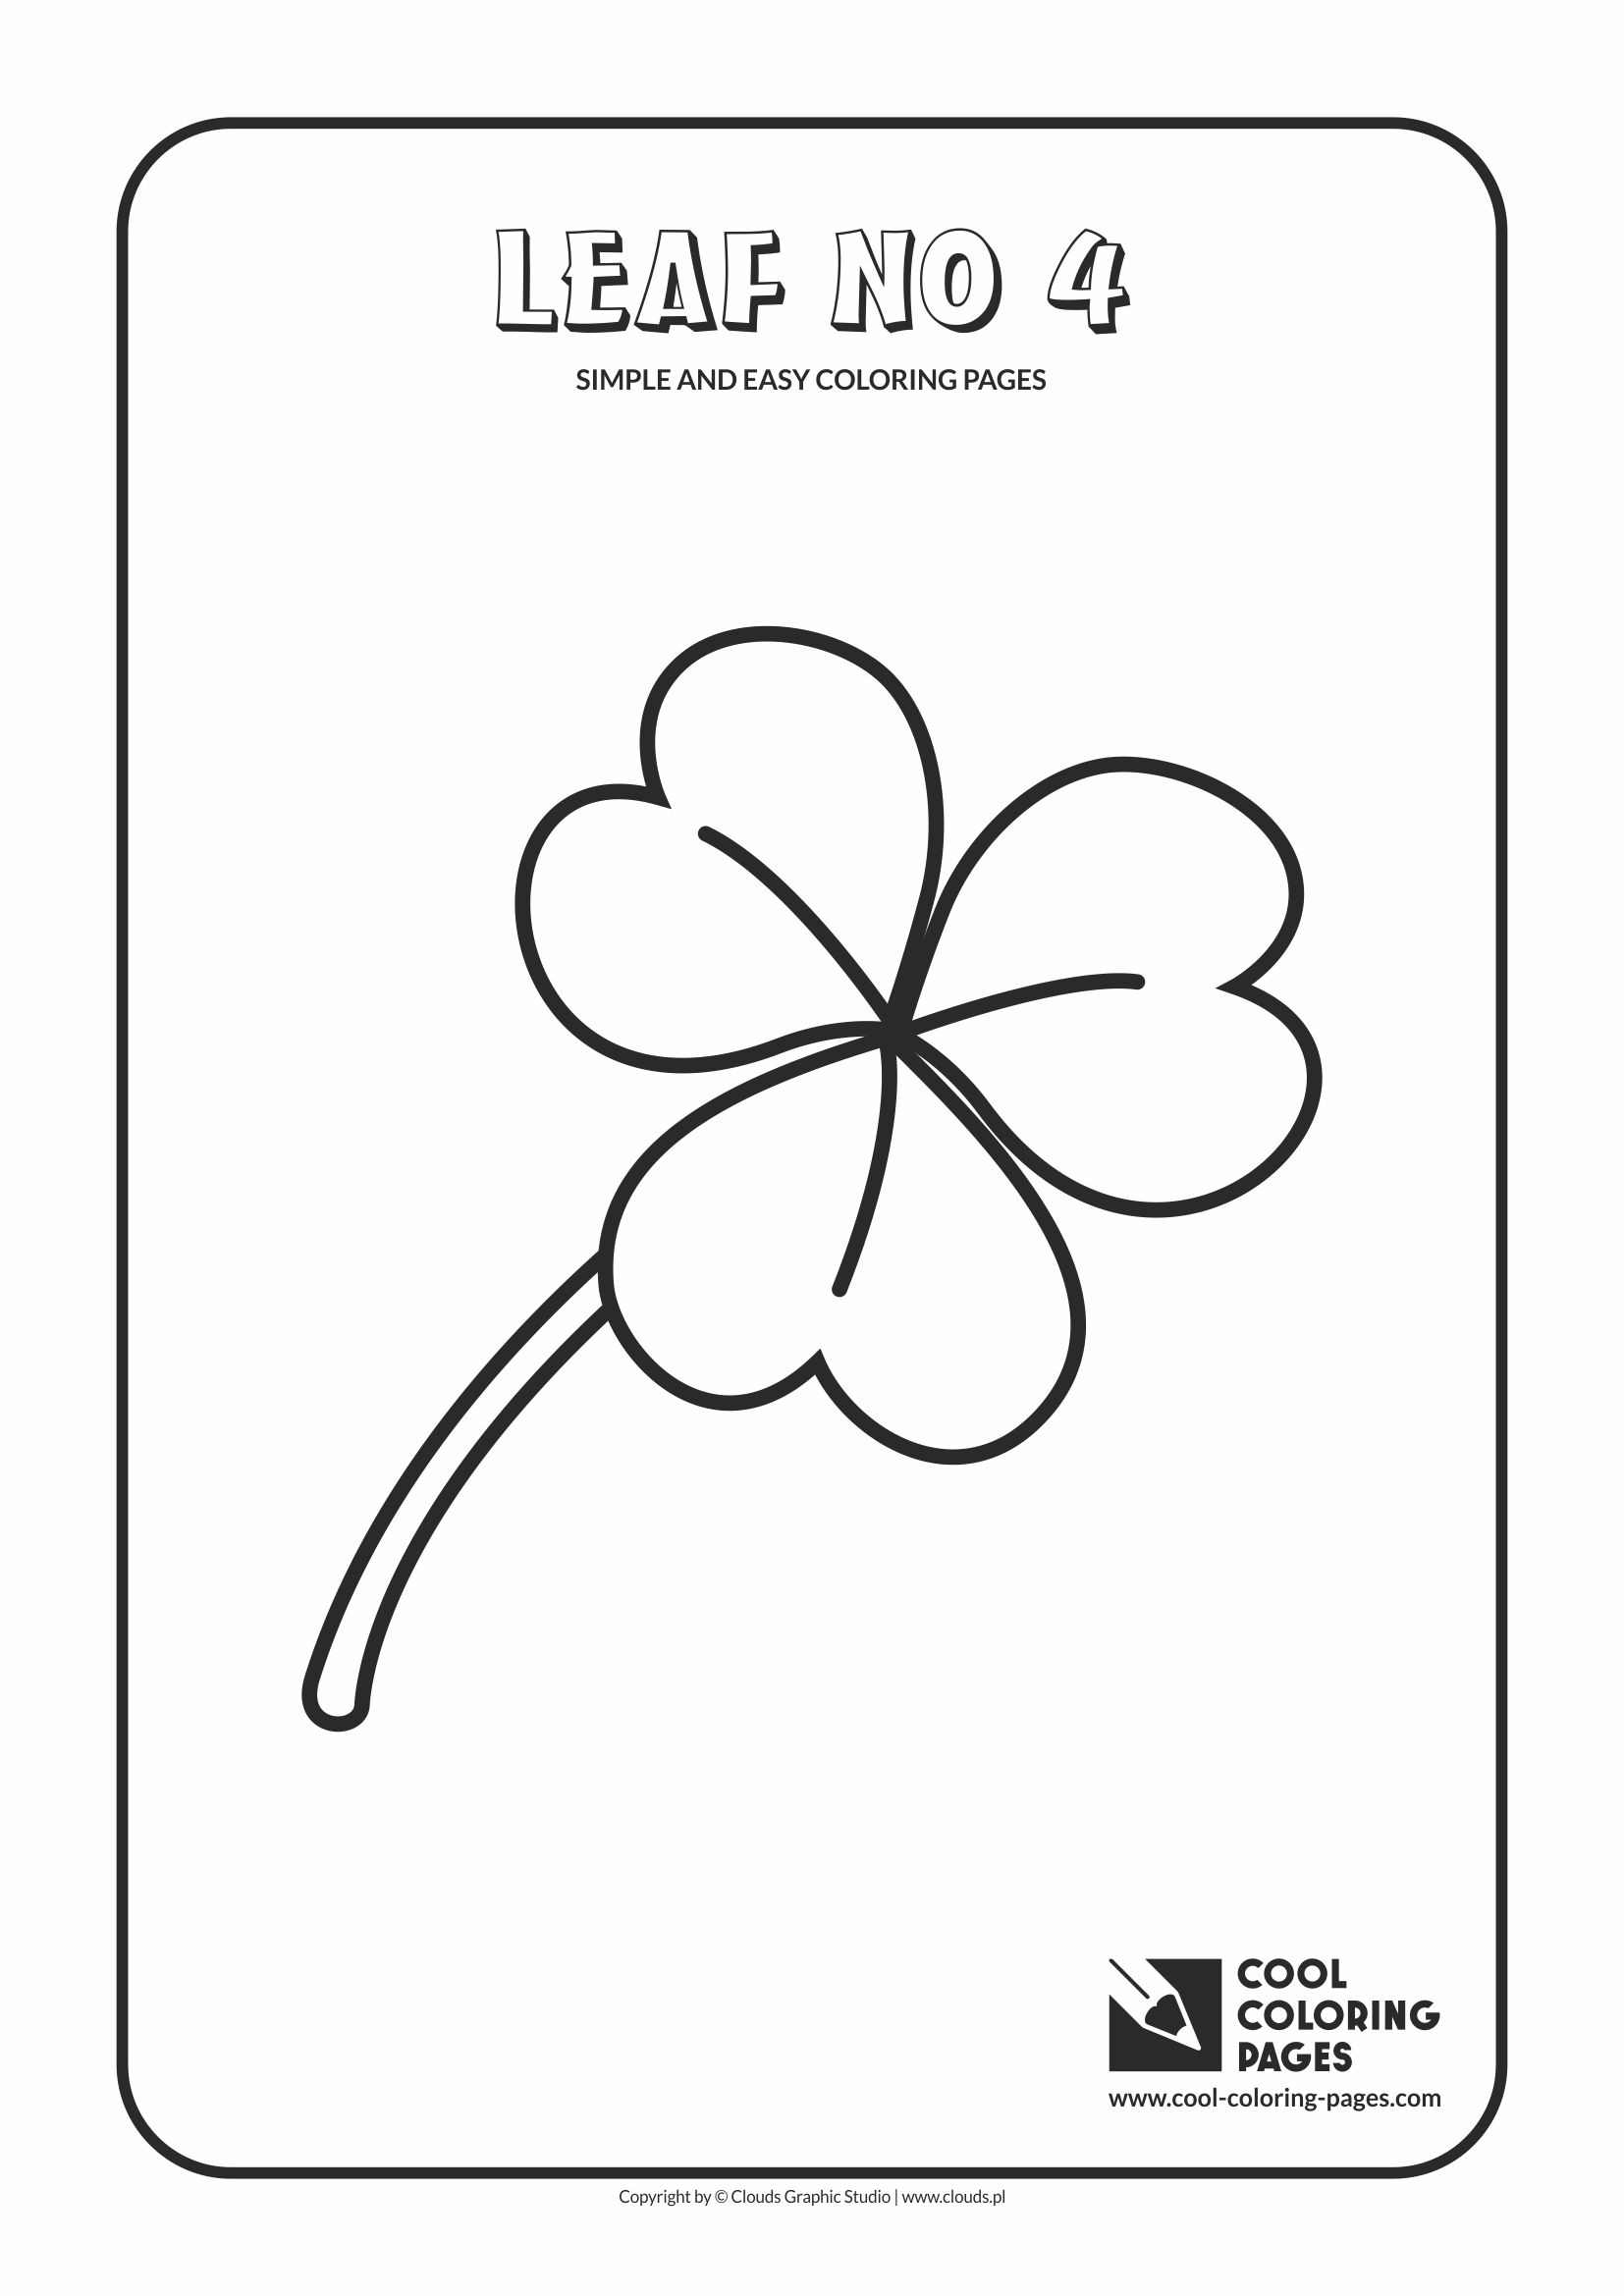 Simple and easy coloring pages for toddlers - Leaf no 4